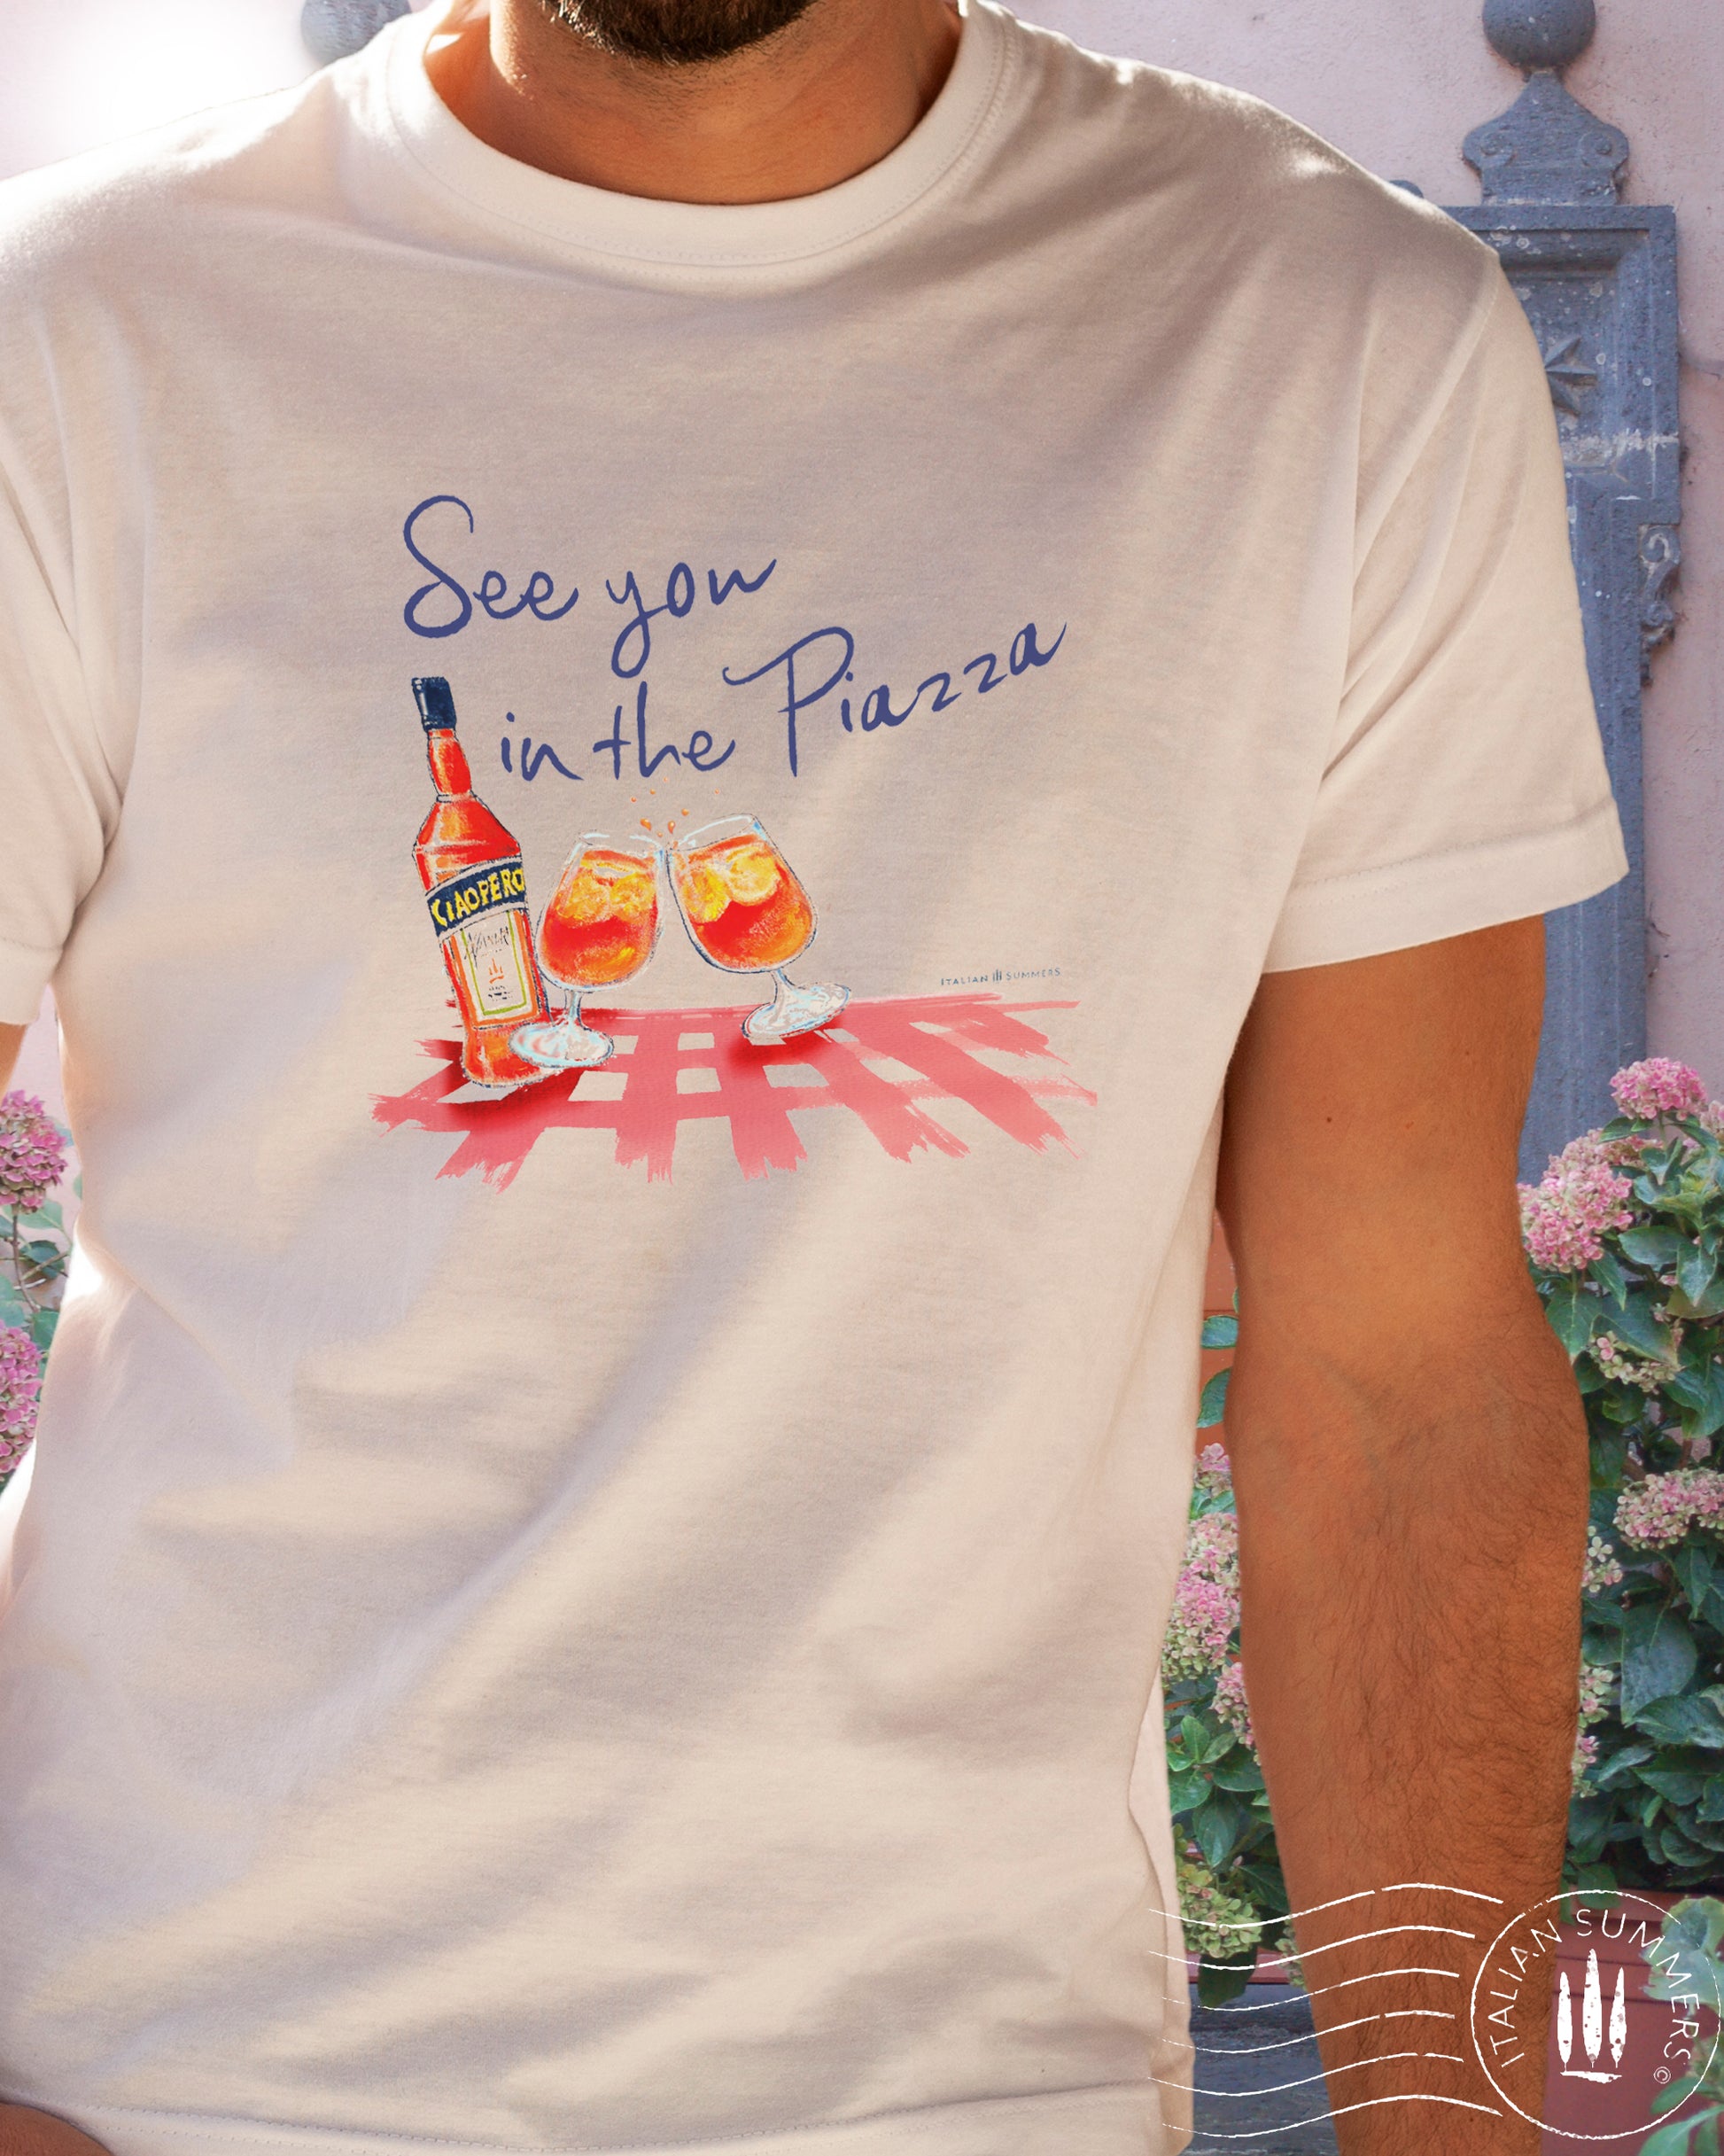 Italy inspired white t-shirt with the text See you in the Piazza in navy blue and a sketch in water color with an Aperol bottle and 2 glassis filled with Aperol Spritz on a bright  red table cloth. Designed and sold by  Italian Summers